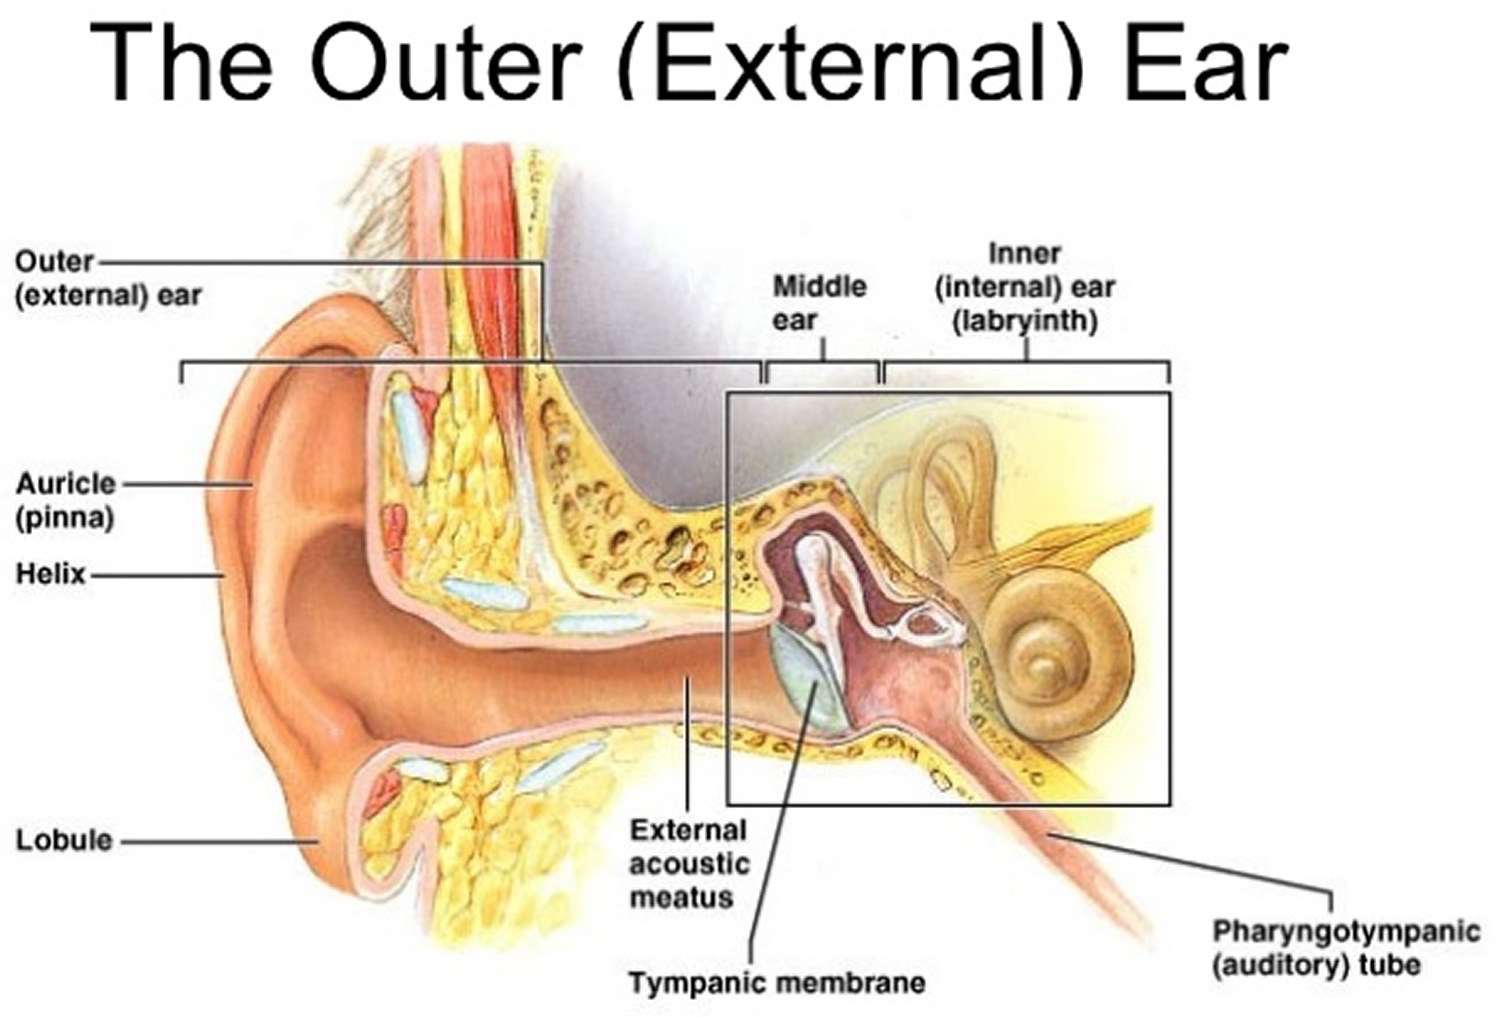 Ear Canal - Causes of Pain, Itchy, Infection, Swollen ...